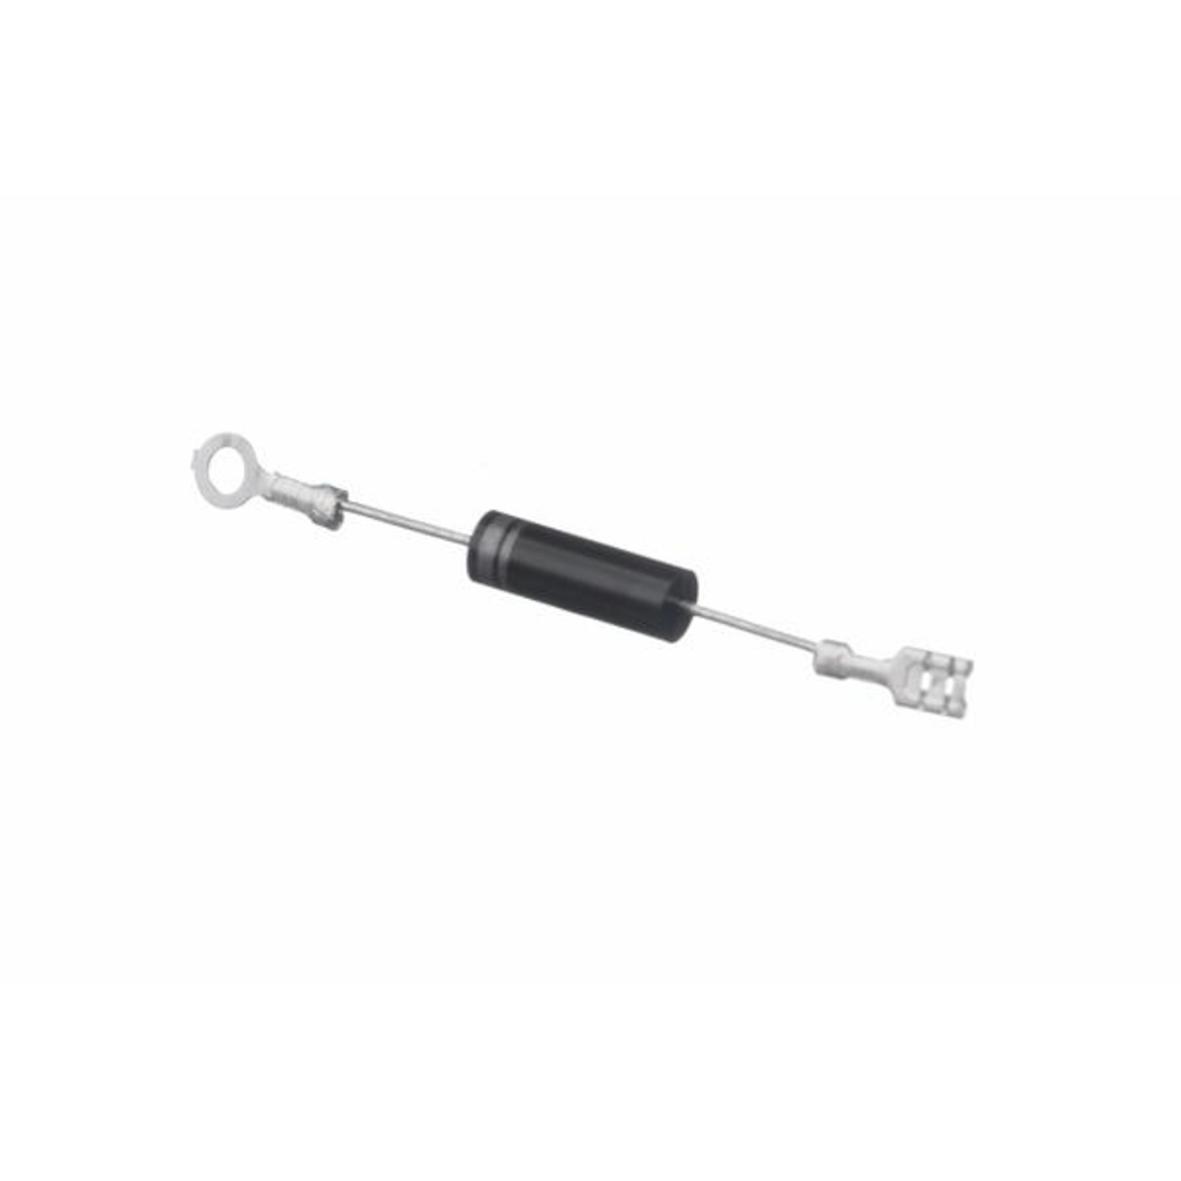 Diode 00606331